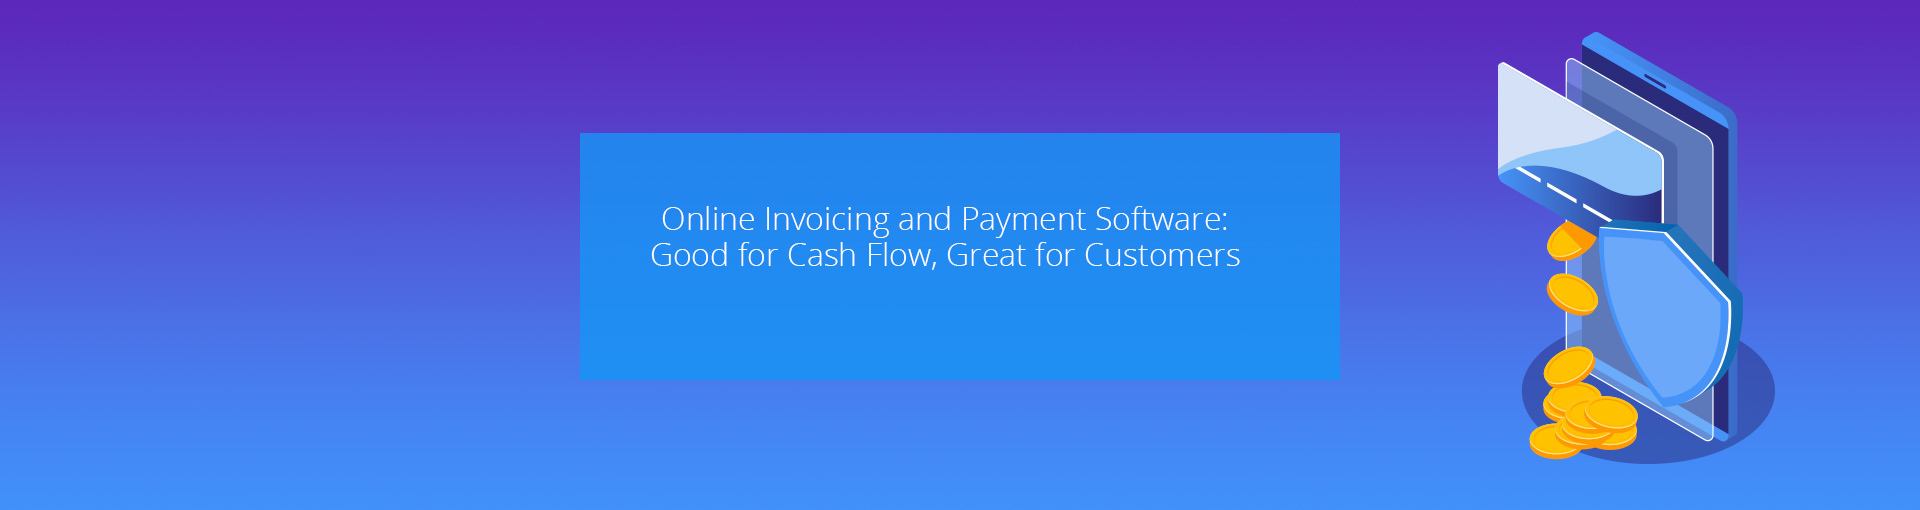 Online Invoicing and Payment Software: Good for Cash Flow, Great for Customers Featured Image